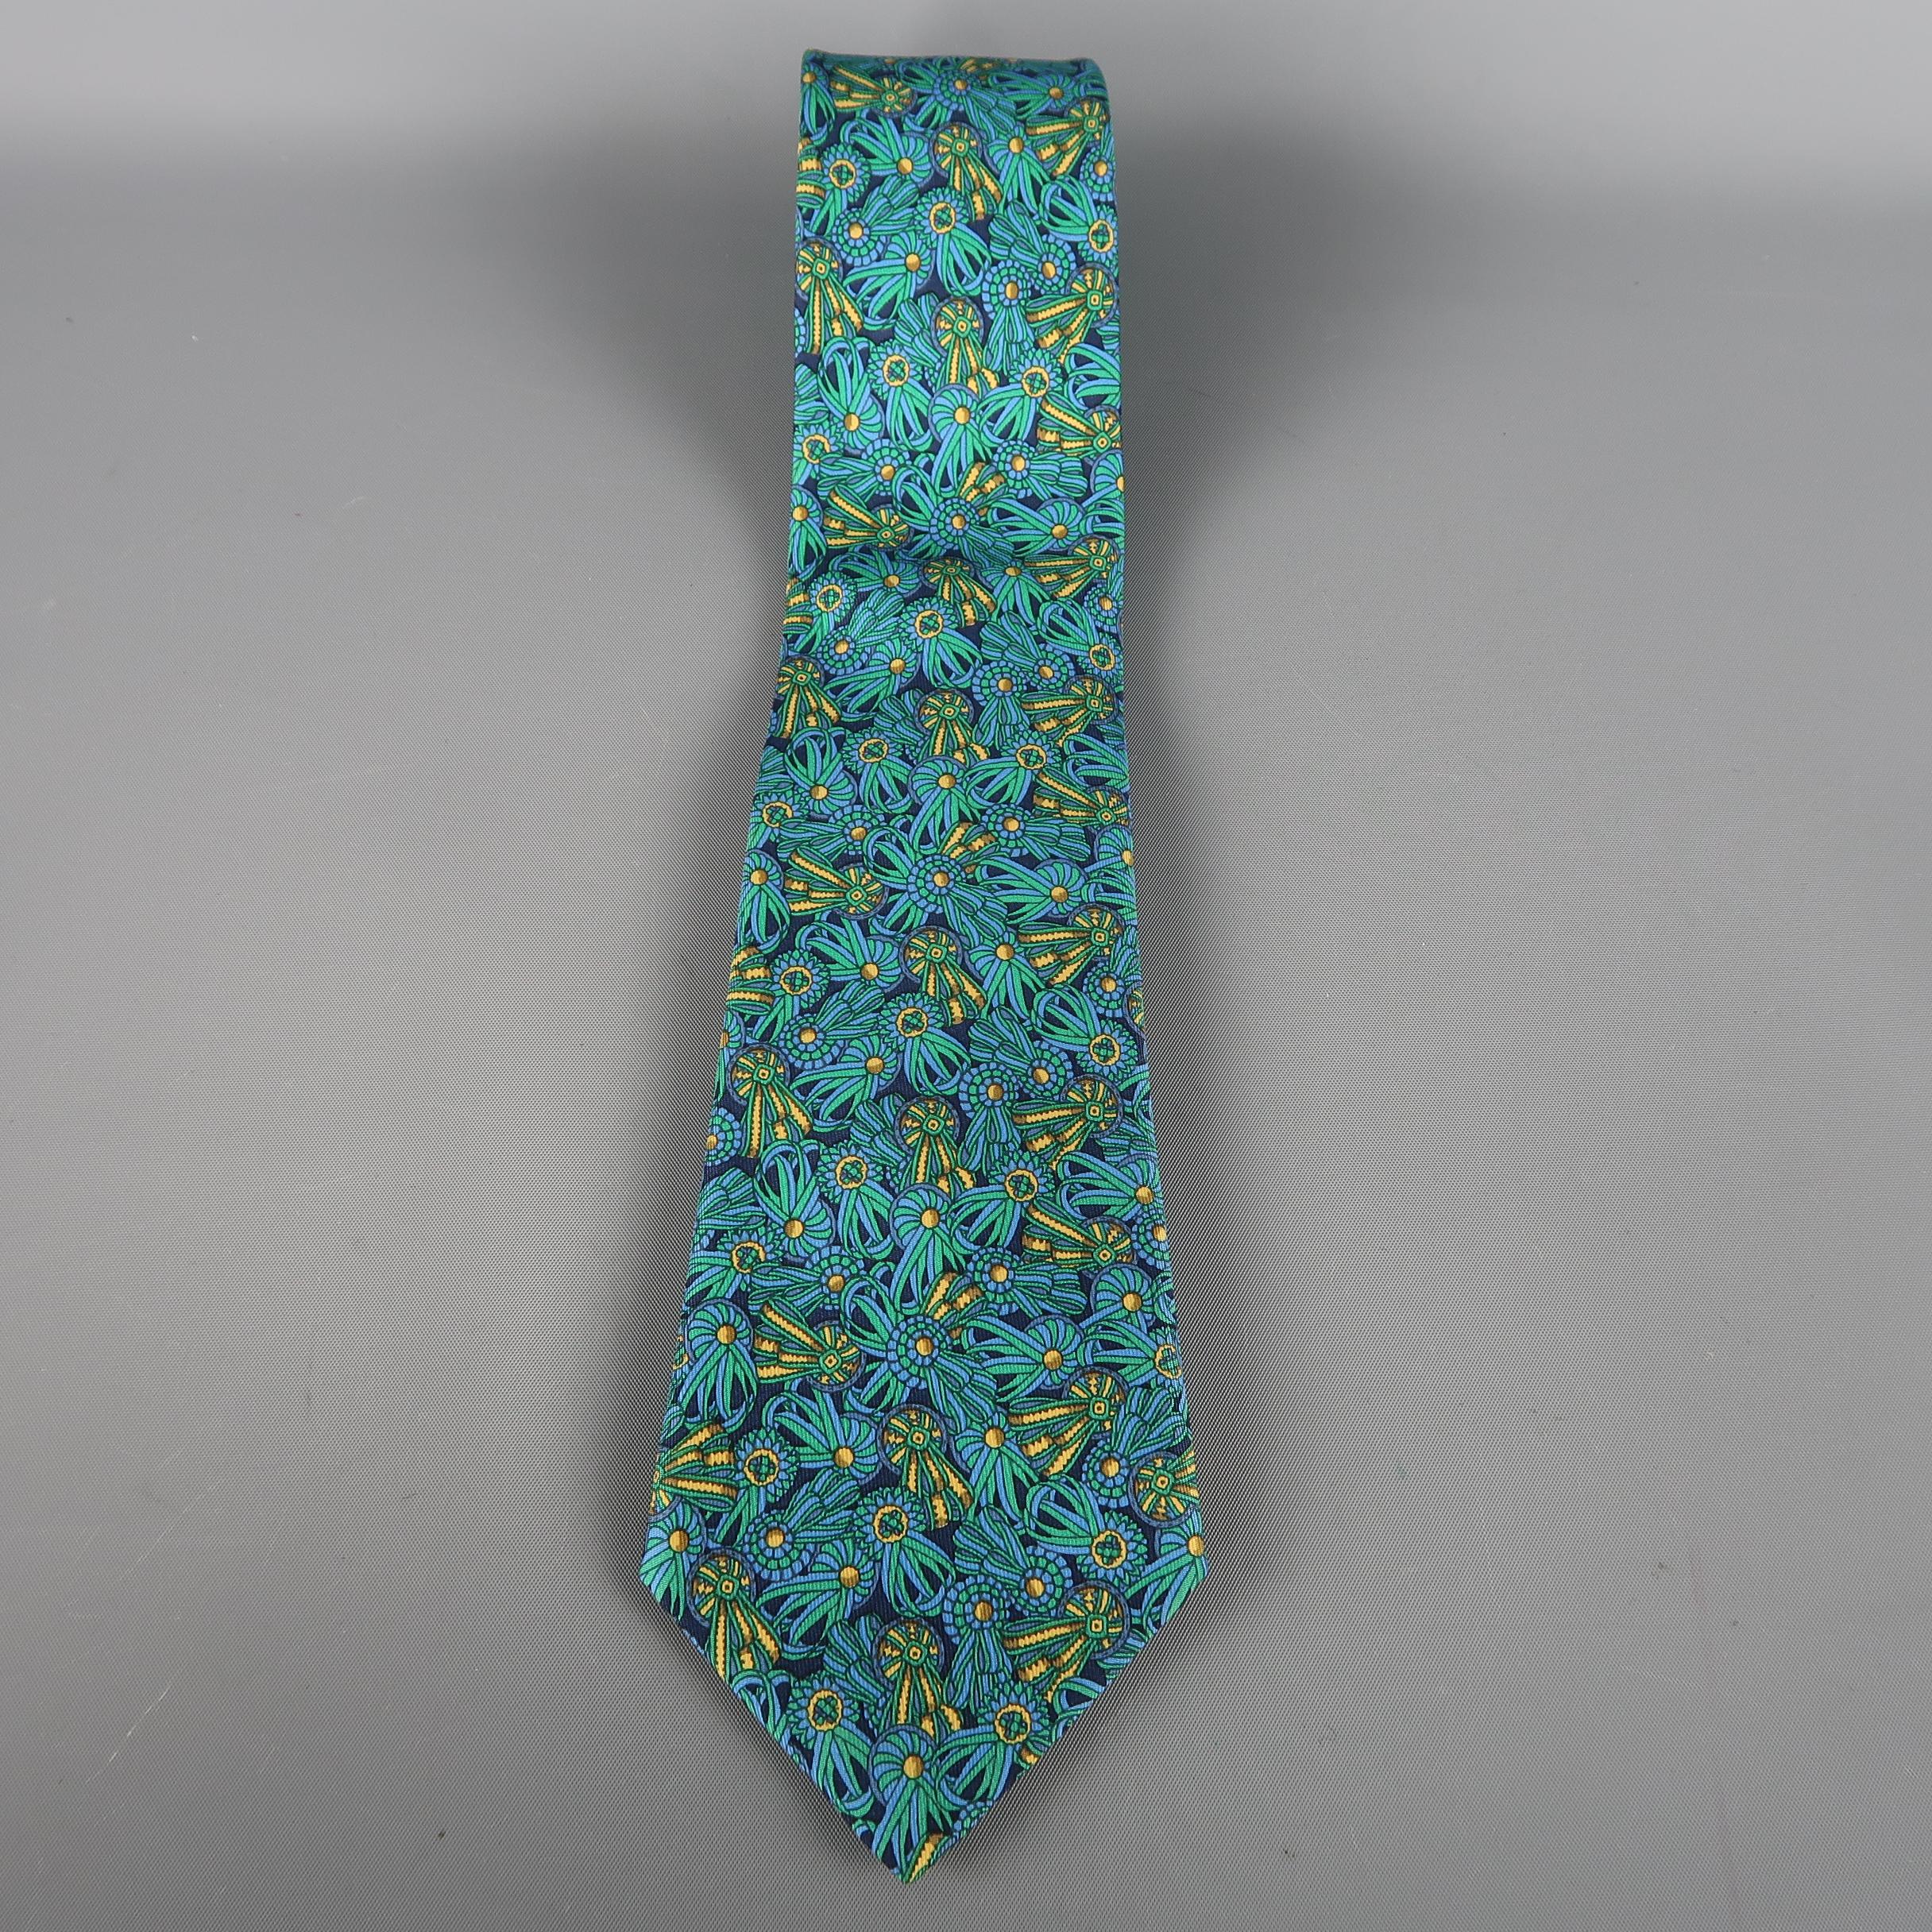 HERMES tie come in green and navy silk  with an all over green and blue tones print. Made in France.
 
Excellent Pre-Owned Condition.
 
Width: 3.5 in.